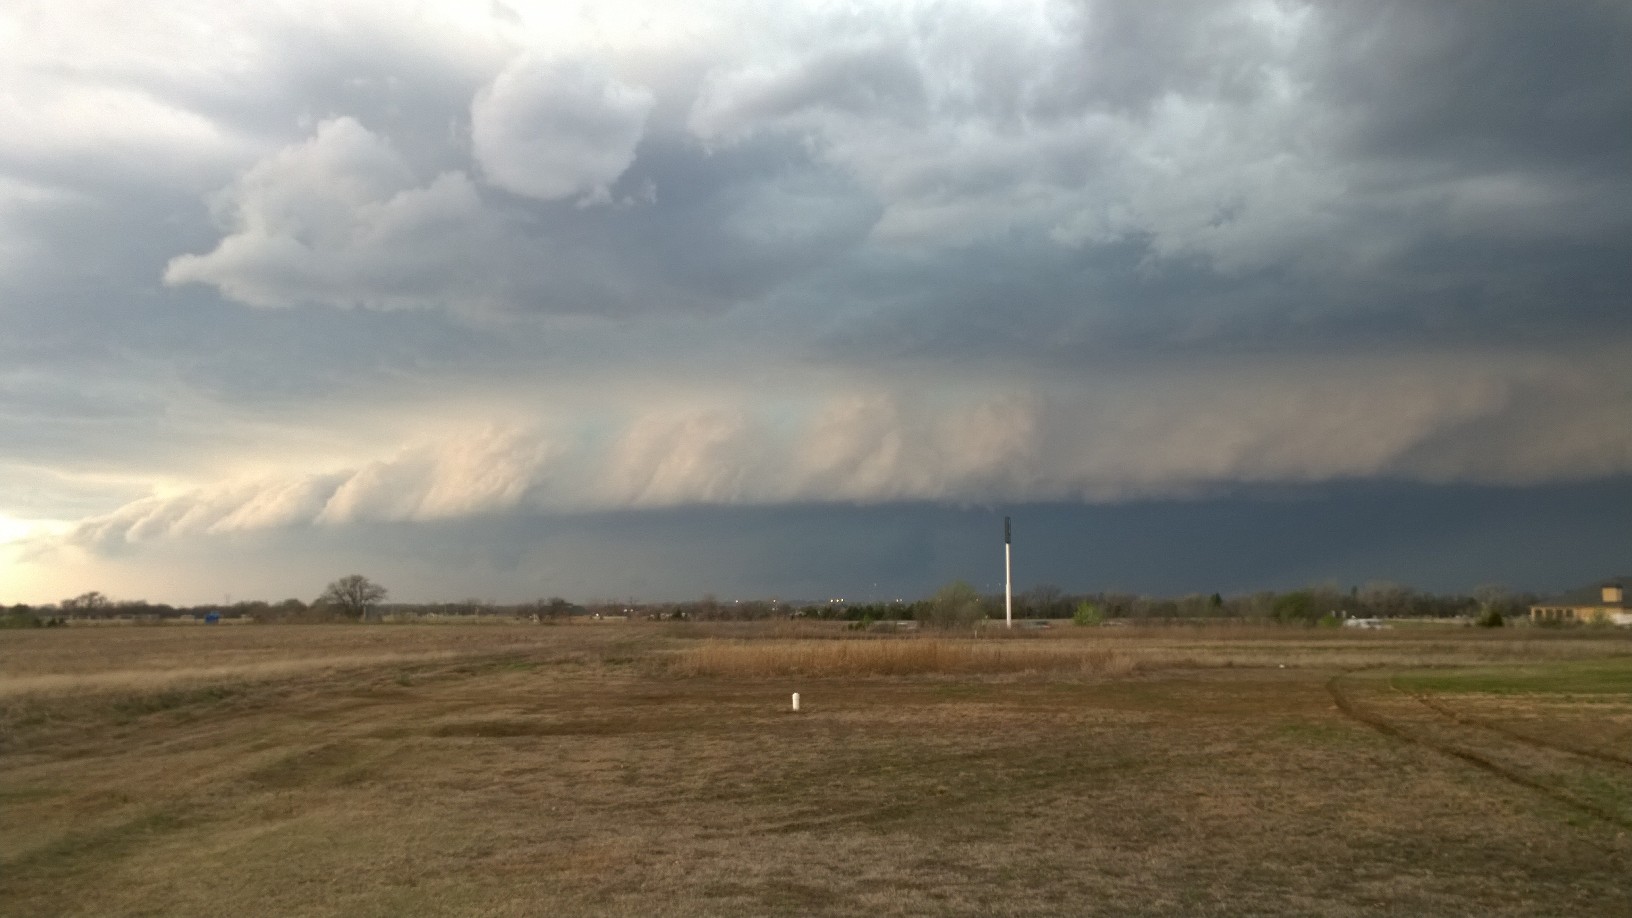 Photo of supercell thunderstorm in the SW OKC/Moore area on March 25th, 2015